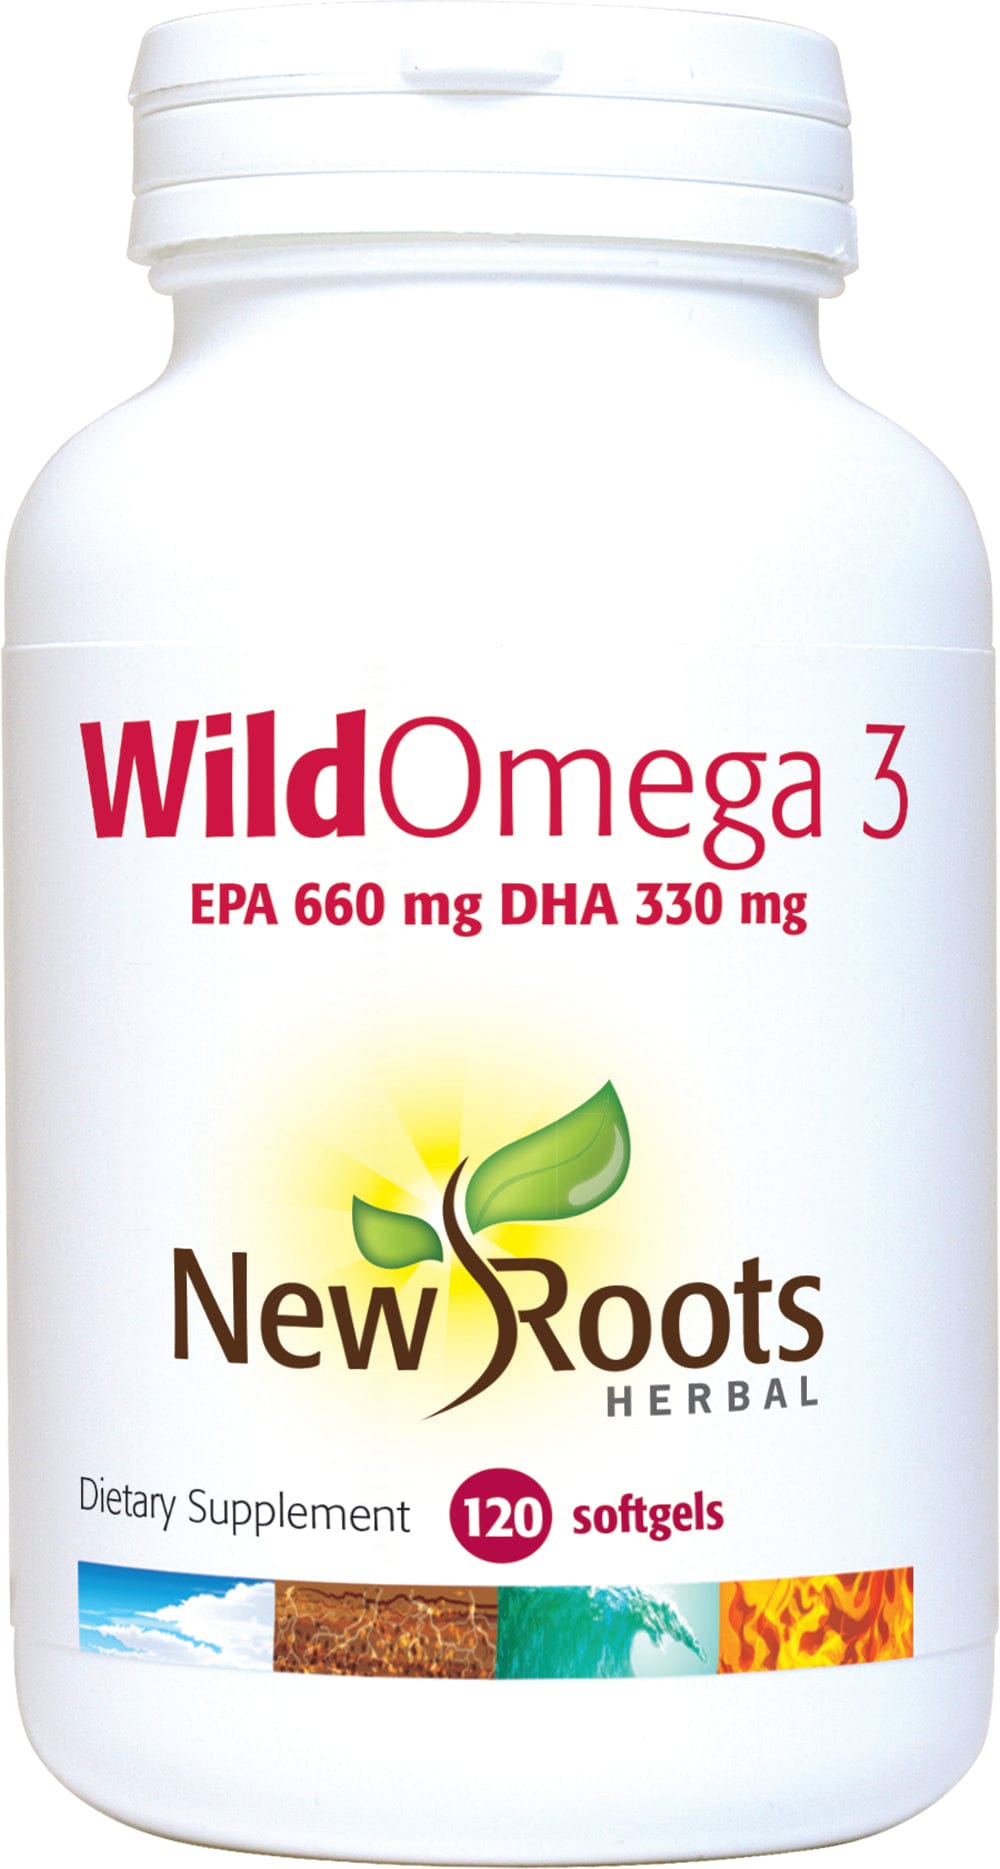 NEW ROOTS HERBAL Suppléments Wild Omega 3 660mg AEP/ 330mg ADH / Oméga 3 sauvage 120 gel